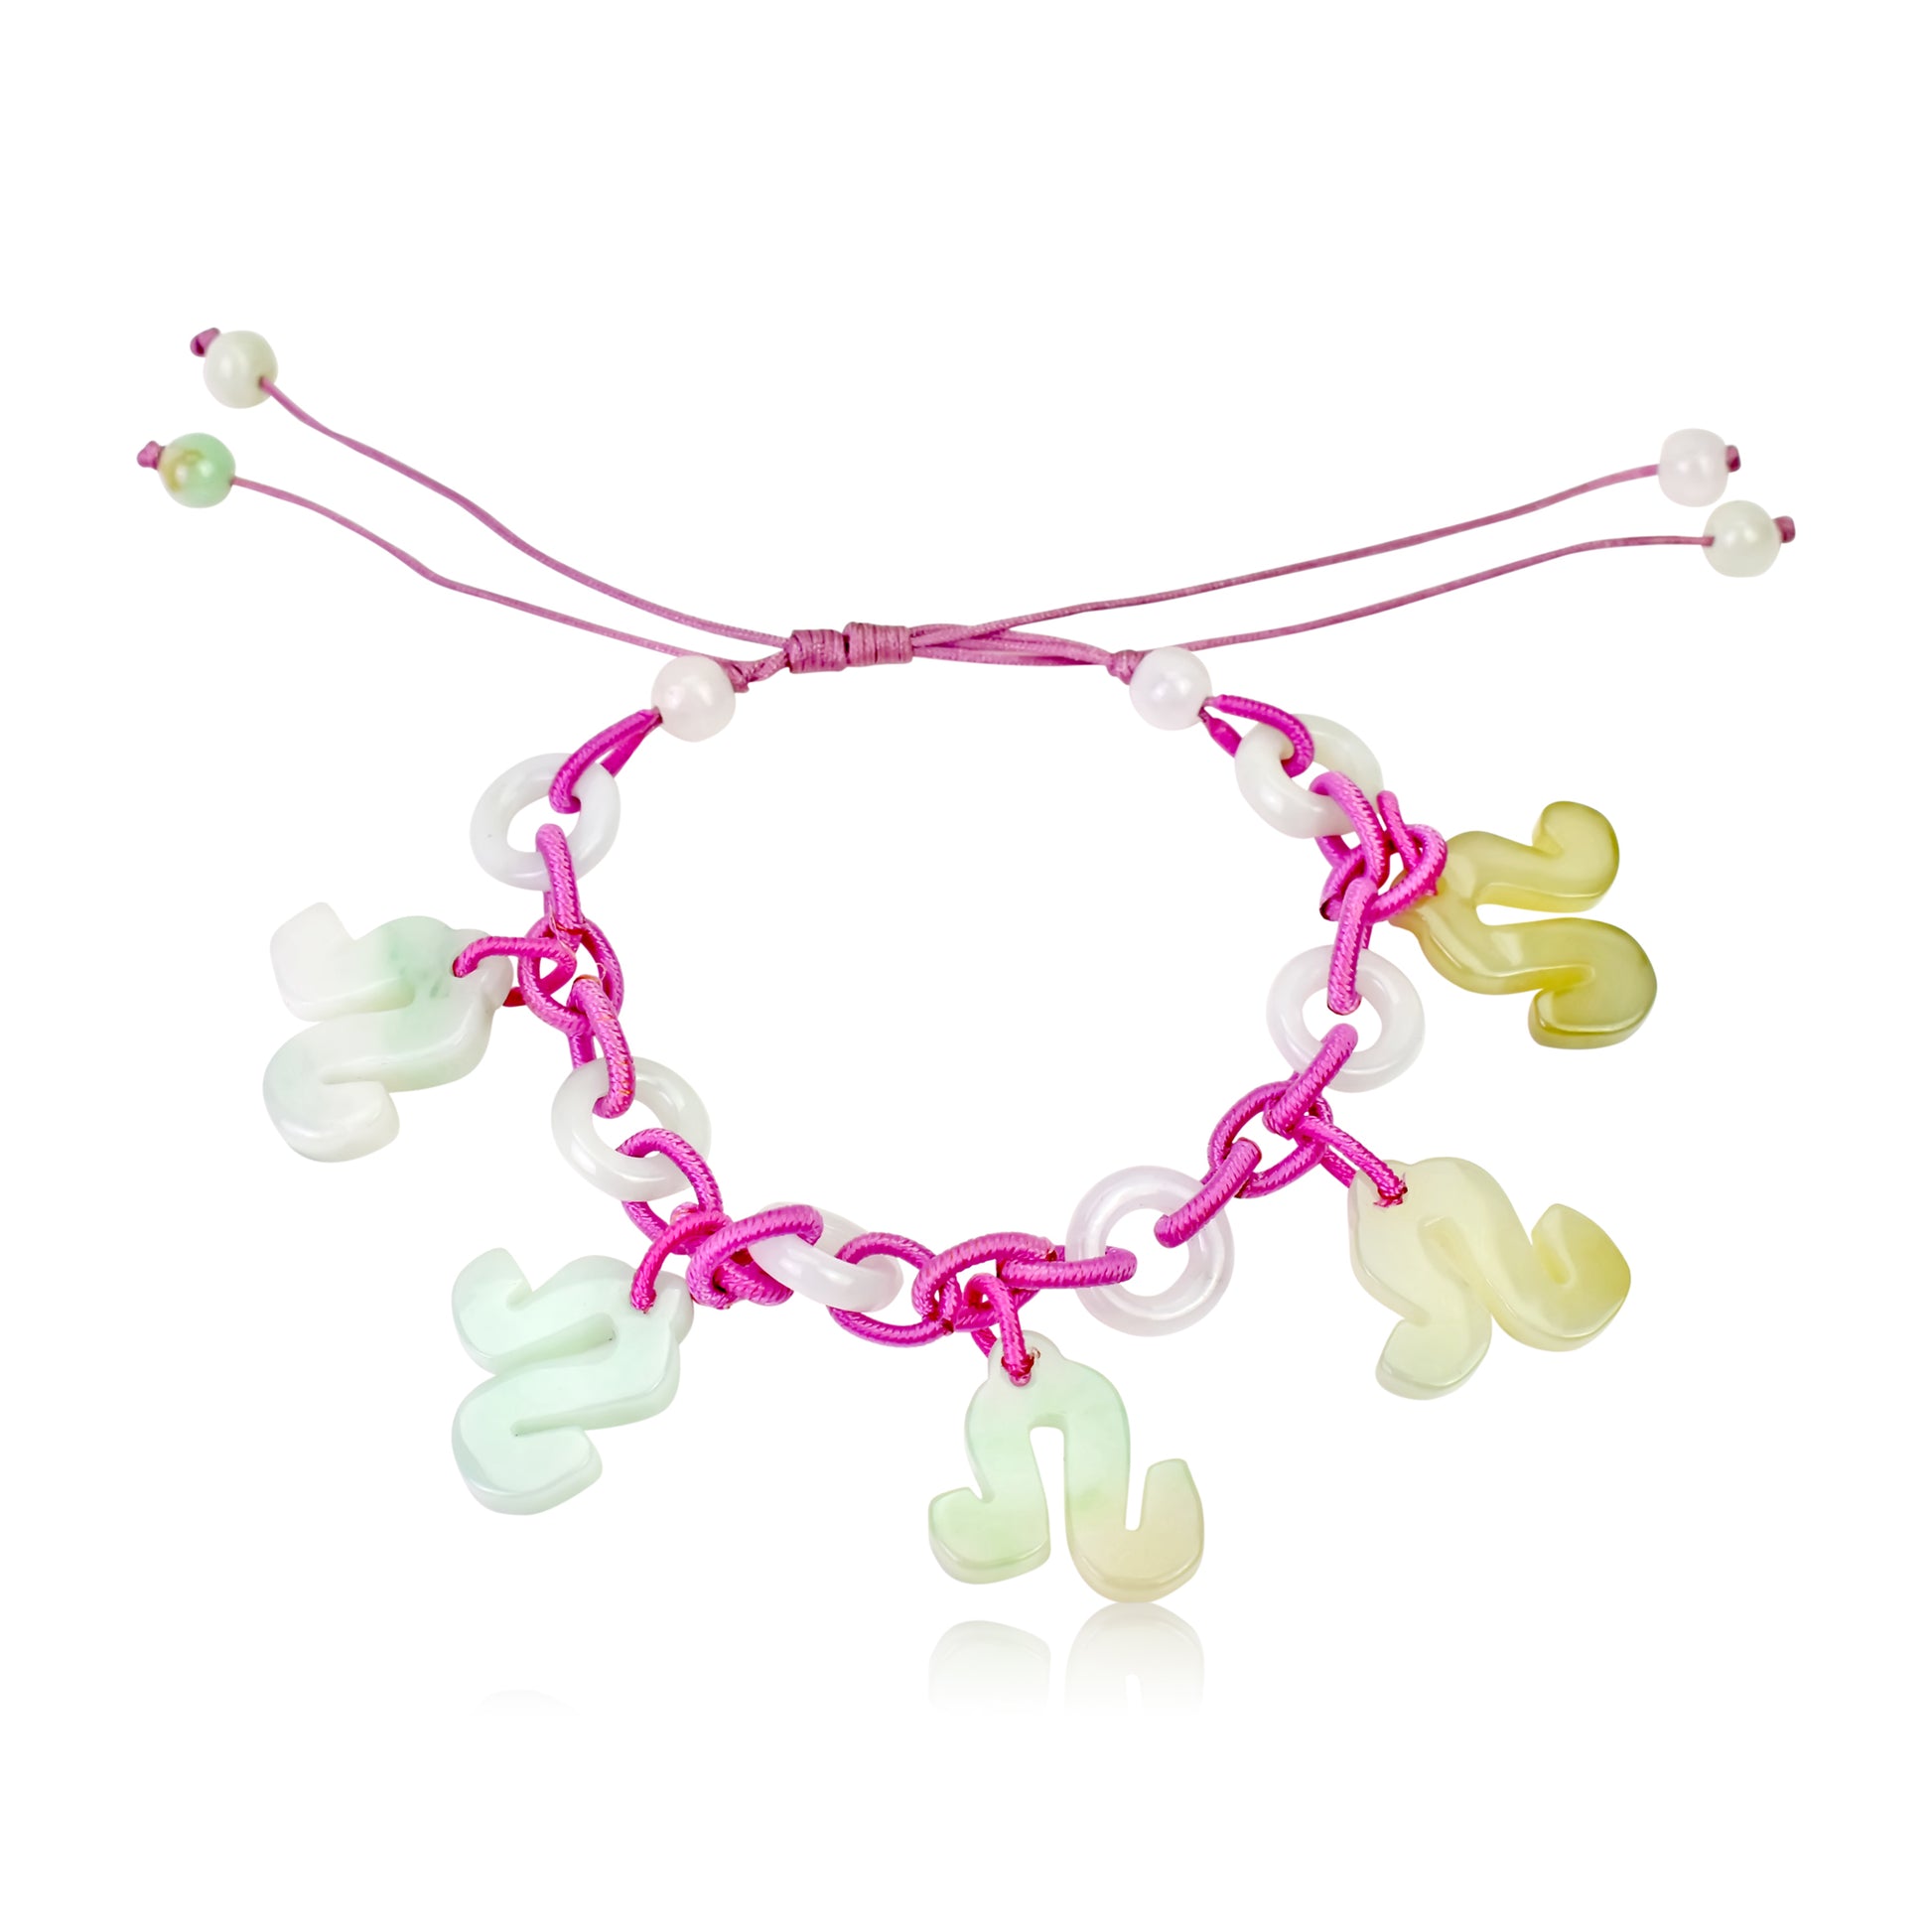 Wear the Force of the Lion on Your Wrist with Our Leo Jade Bracelet made with Purple Cord